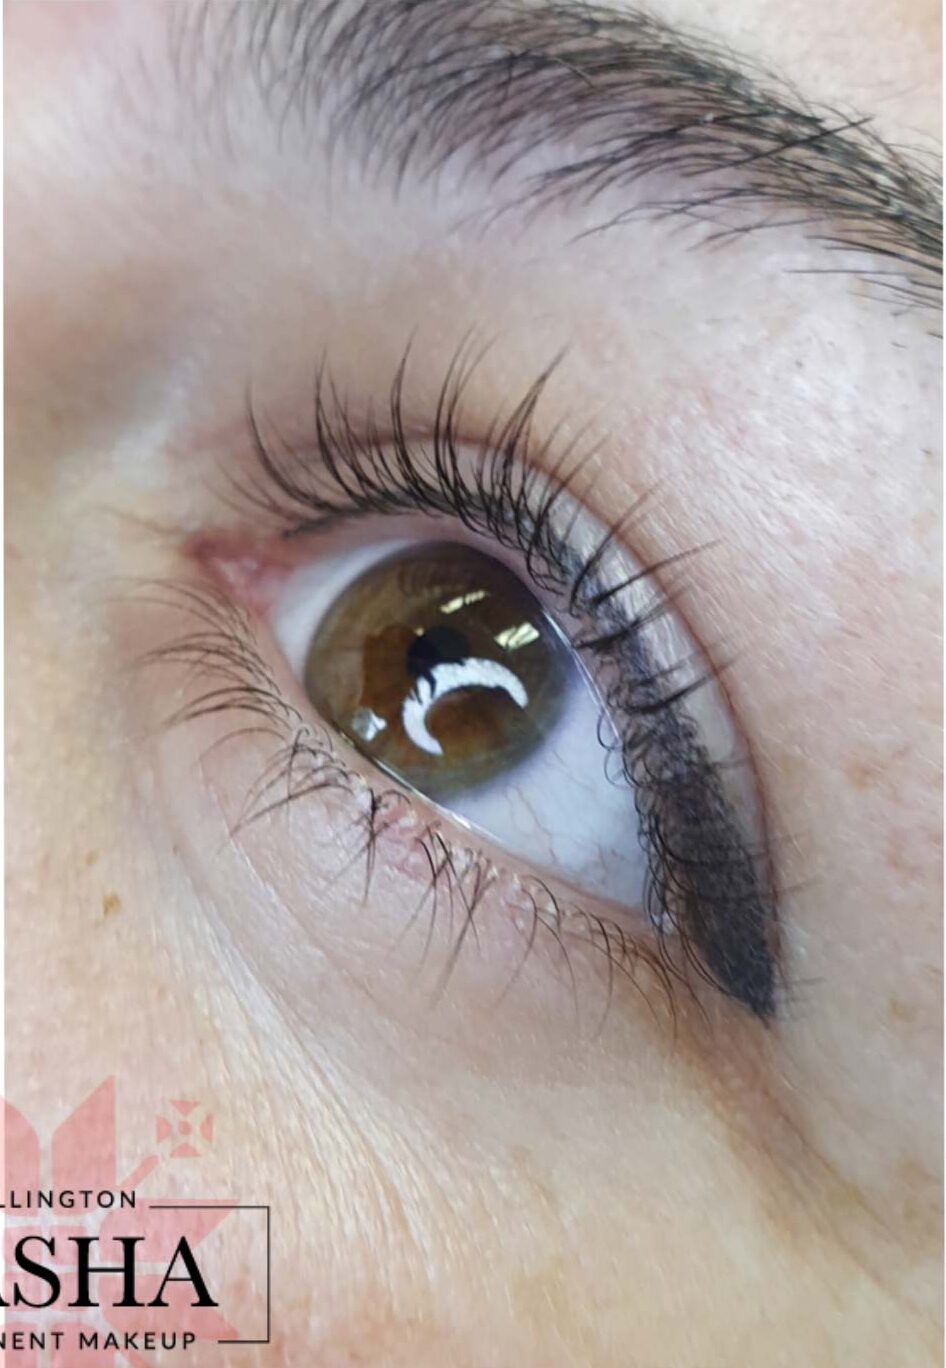 Thick Eyeliner Cosmetic Tattoo. Cosmetic and Mediical Tattoo by Dasha. Permanent makeup and reconstructive tattoo, scalp micro-pigmentation in Christchurch, New Zealand